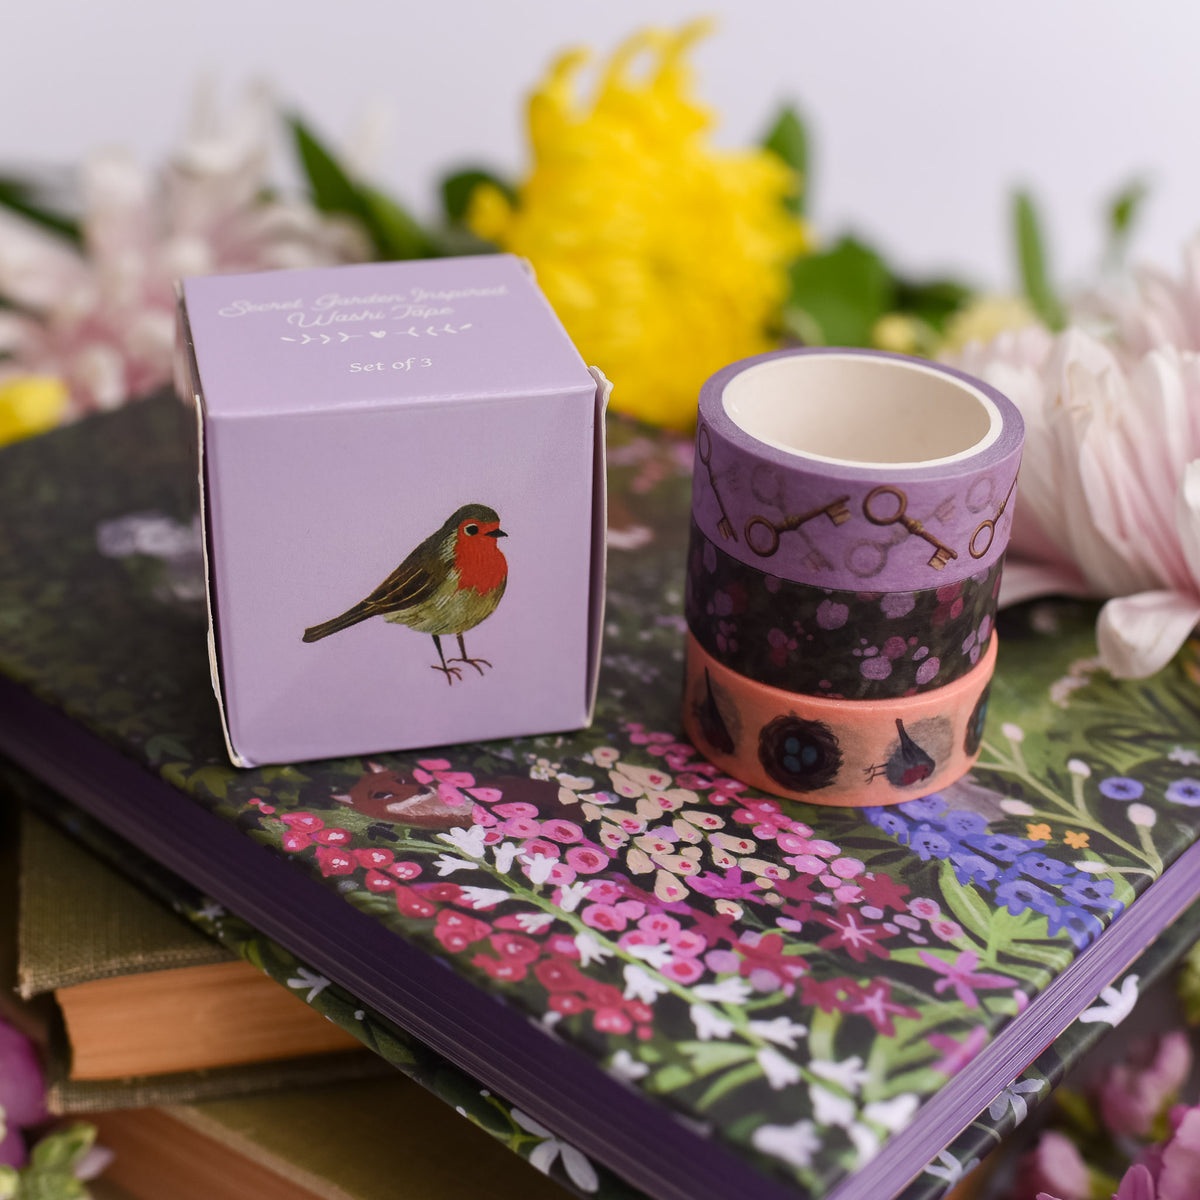 Secret Garden Set of 3 Washi Tape are 3 different patterns of tape stacked next to a purpple box with a robin bird on it